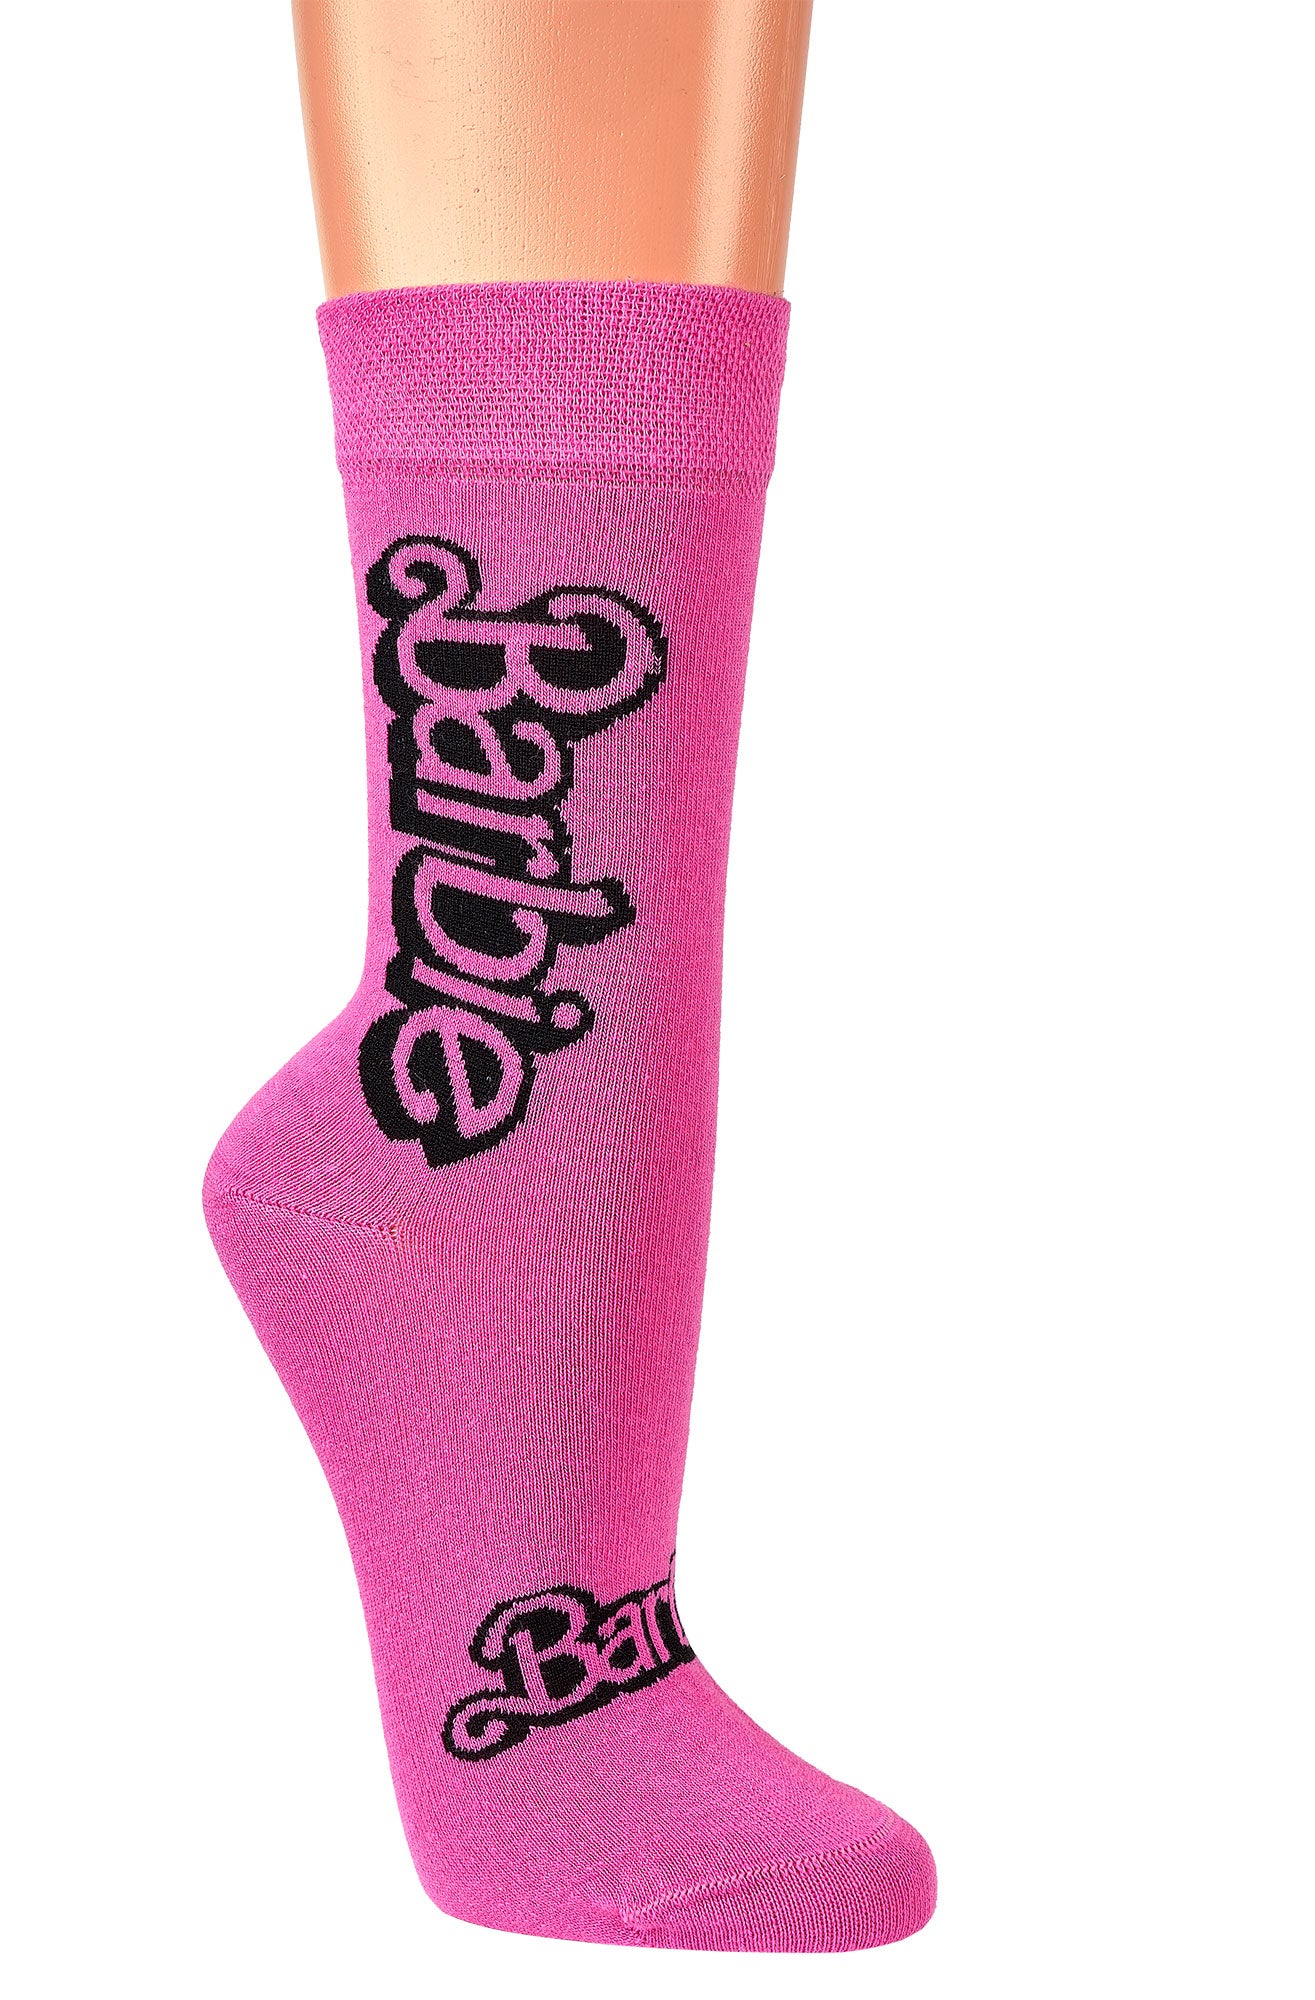 Barbie® trendy socks for girls and women in typical Barbie style